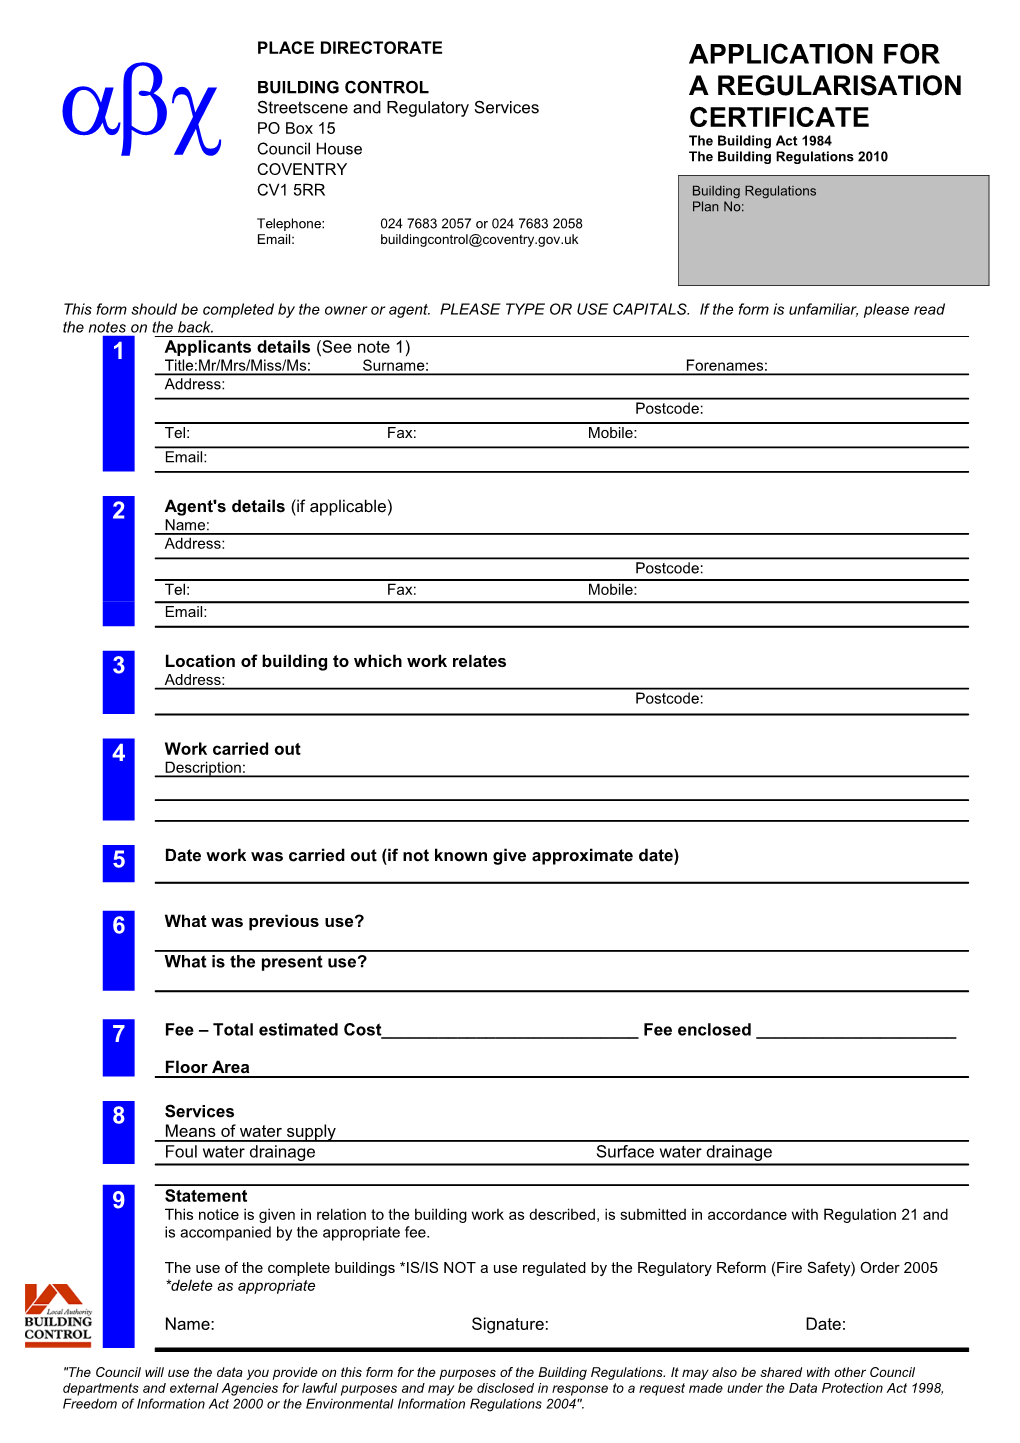 This Form Should Be Completed by the Owner Or Agent. PLEASE TYPE OR USE CAPITALS. If The